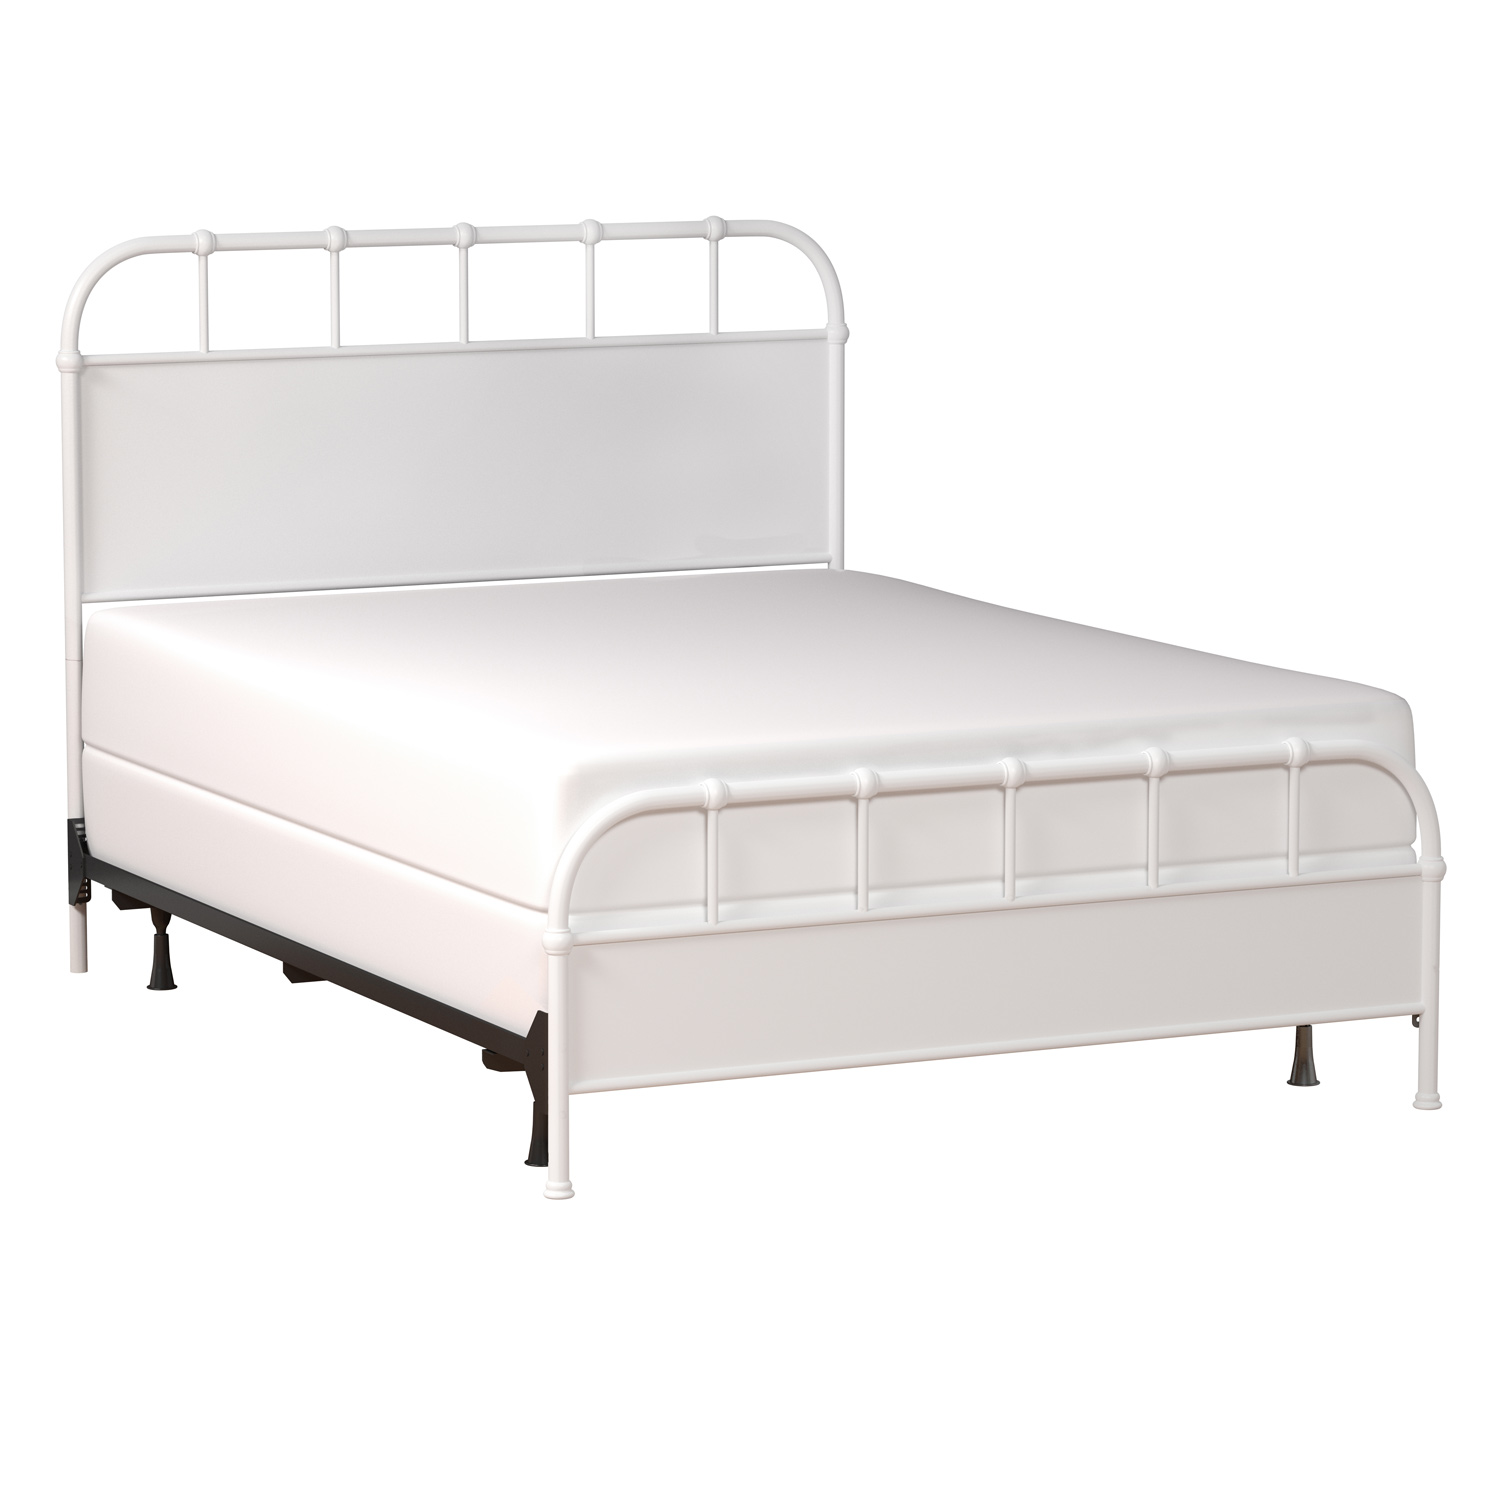 Hillsdale Grayson Metal Bed - Textured White